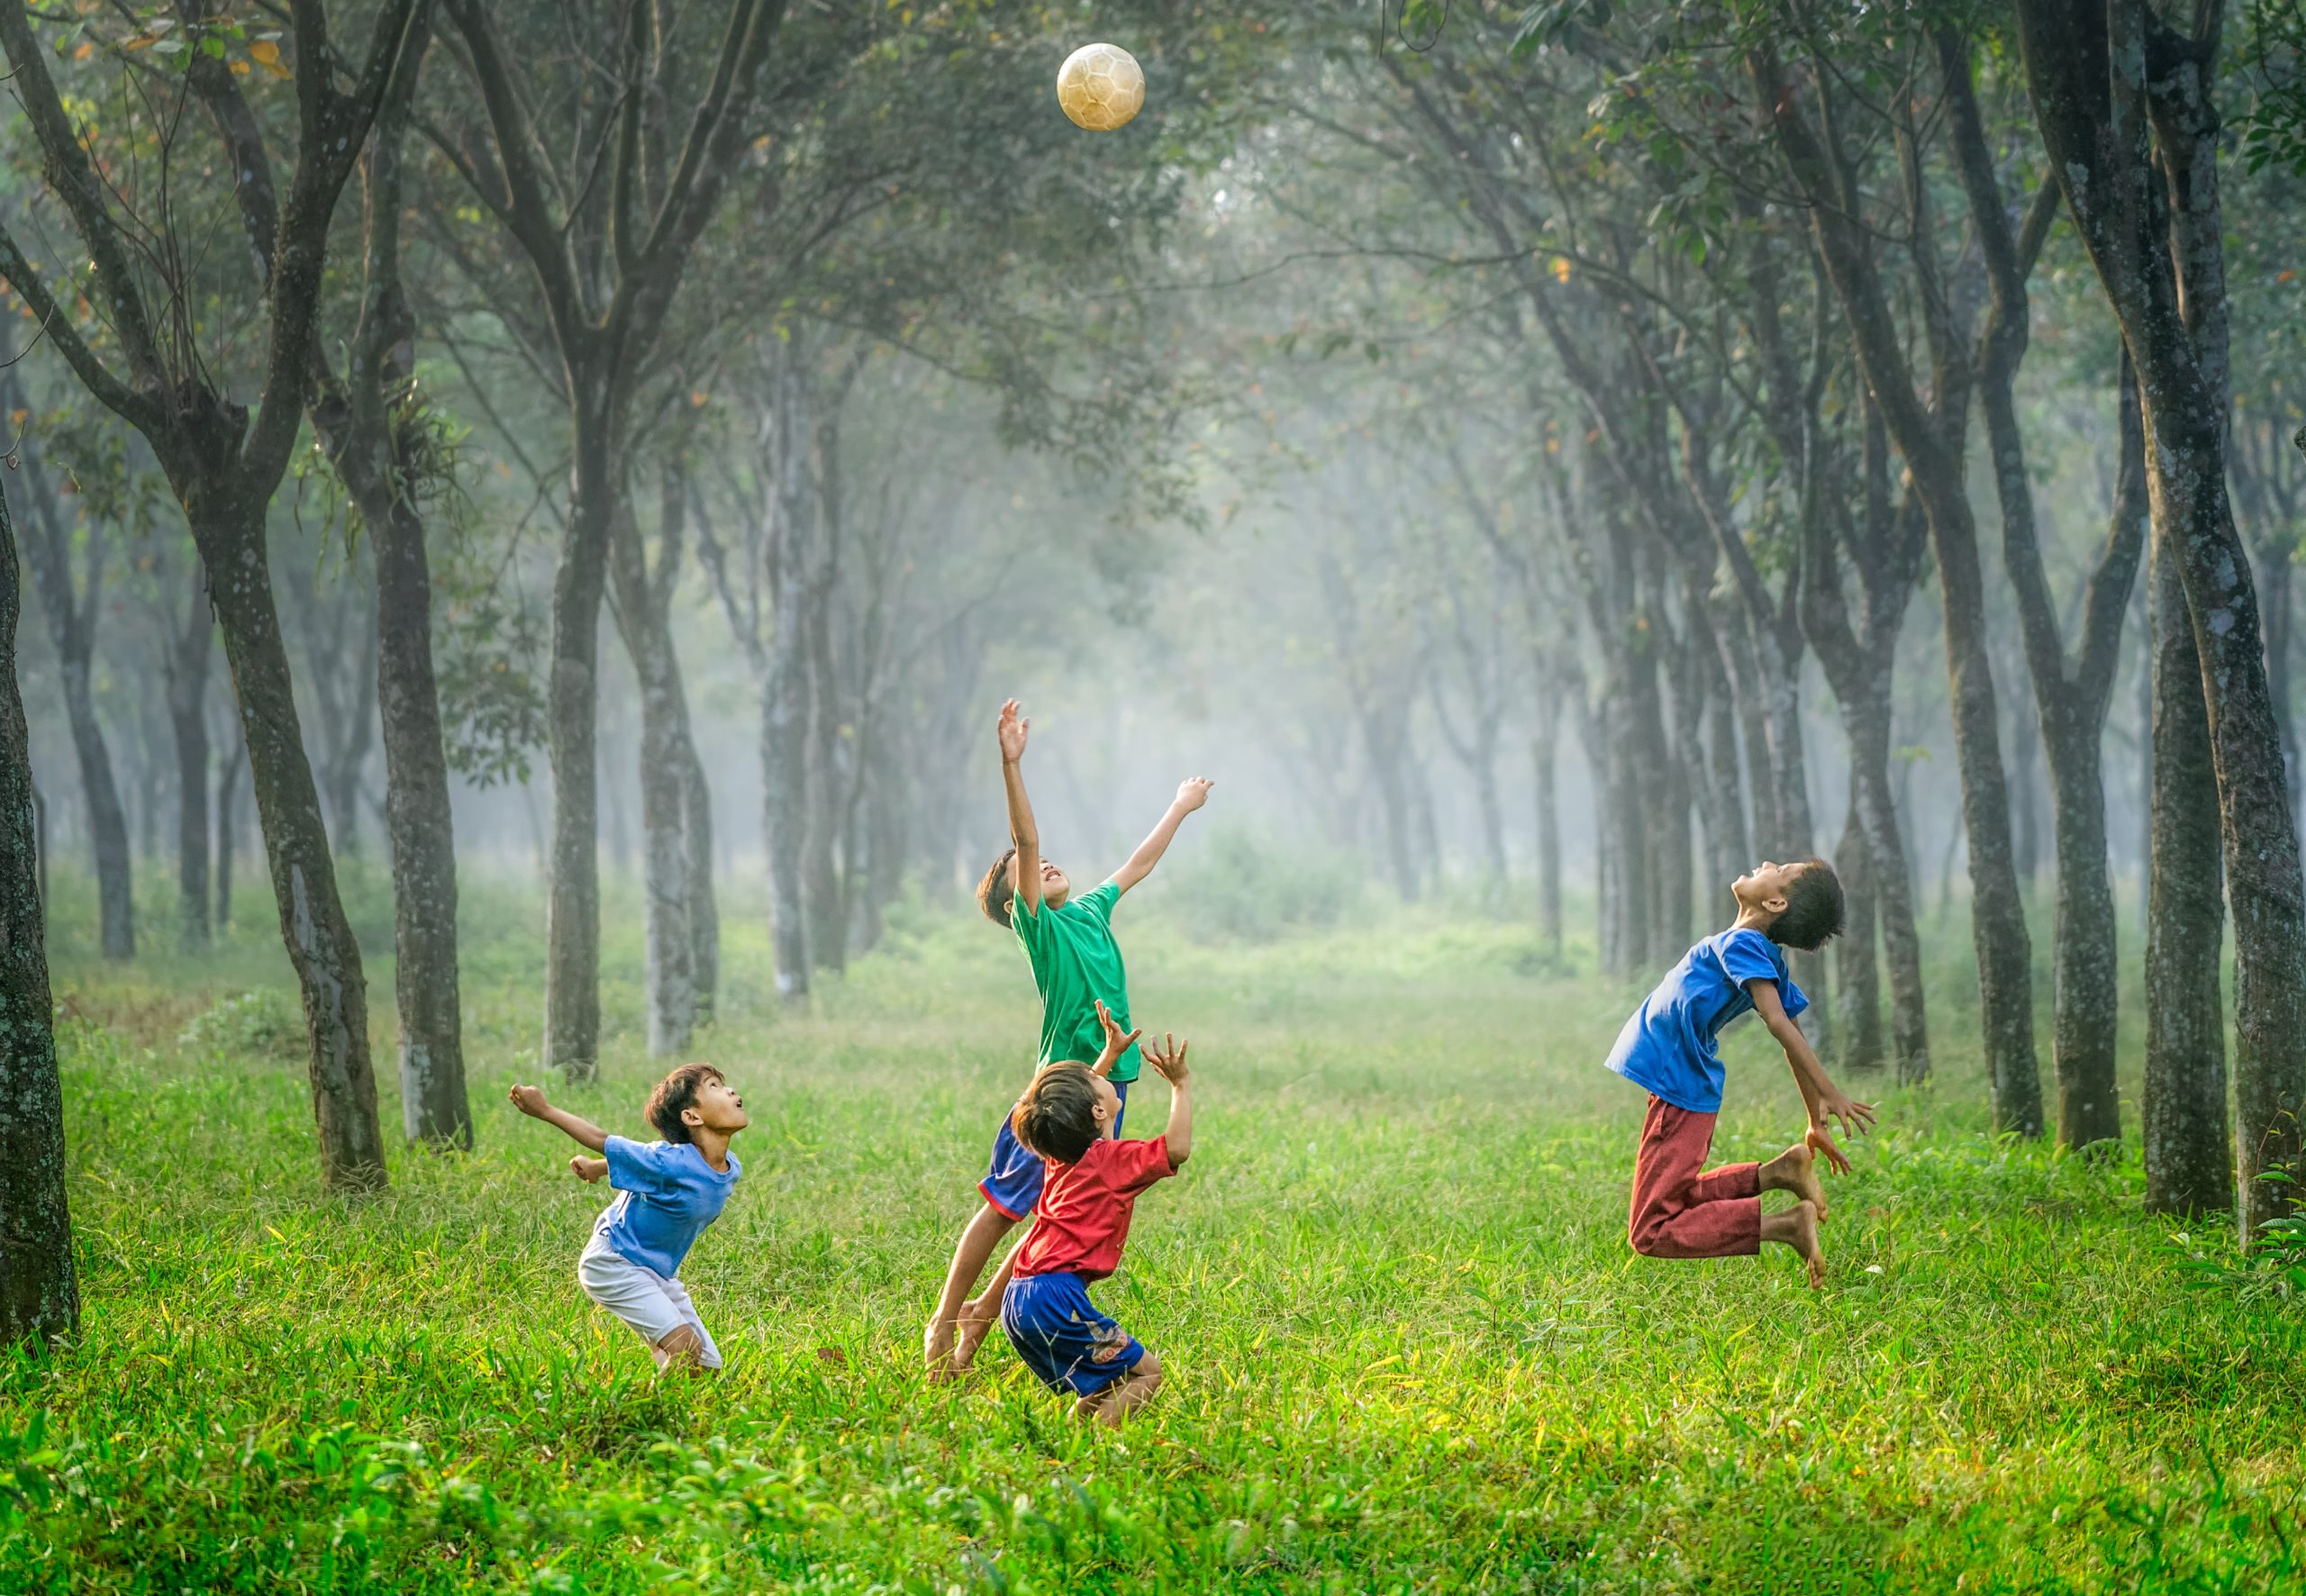 Four children playing with a ball in a field surrounded by trees.